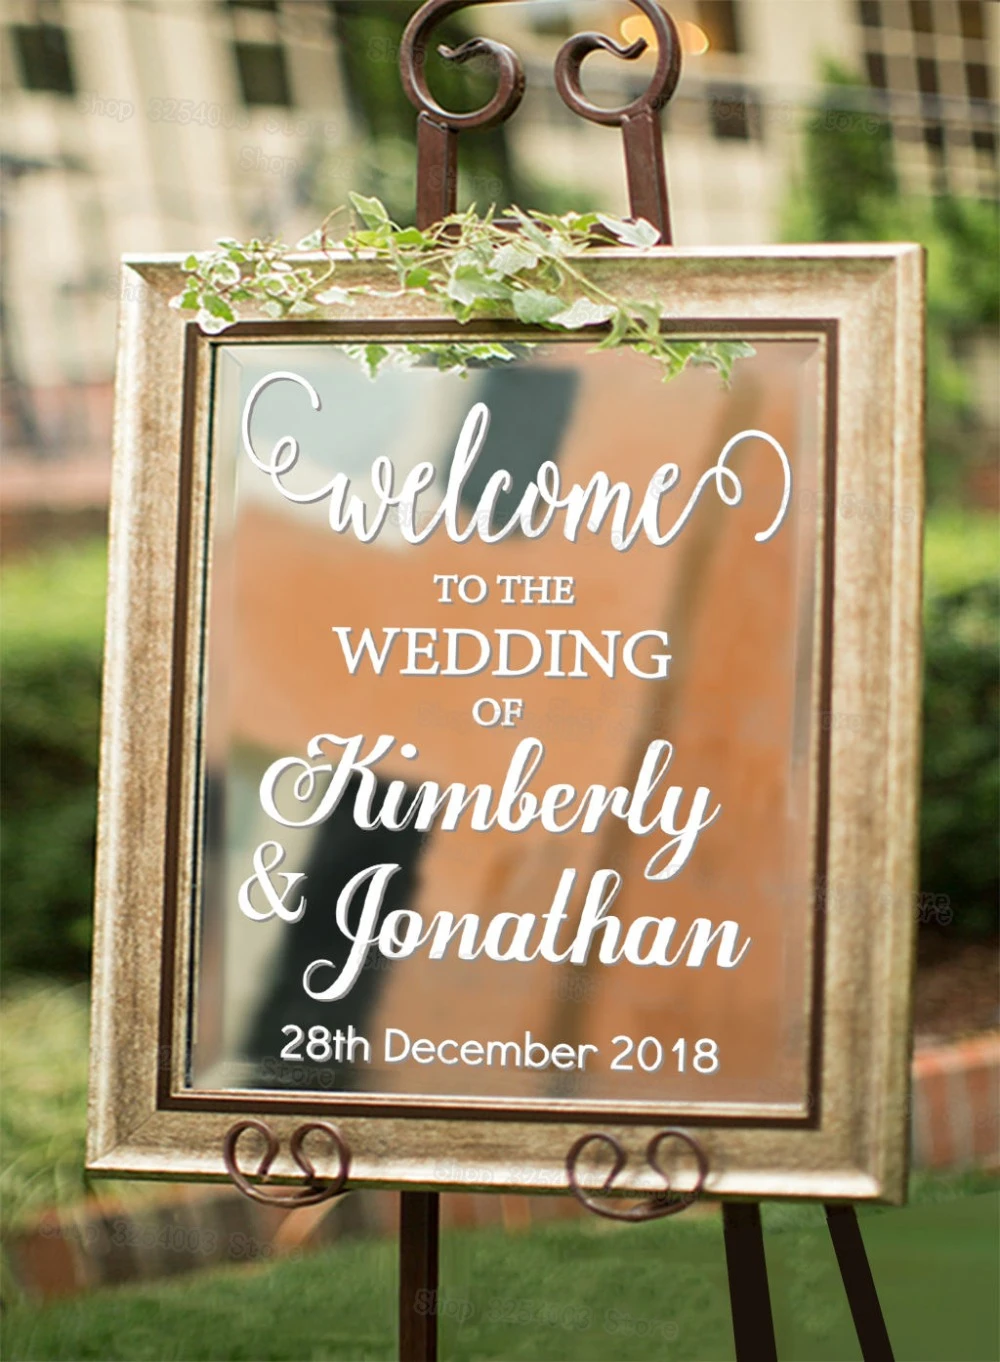 Personalised Wedding Party Welcome sign wall date Art Vinyl Decal Sticker V642 